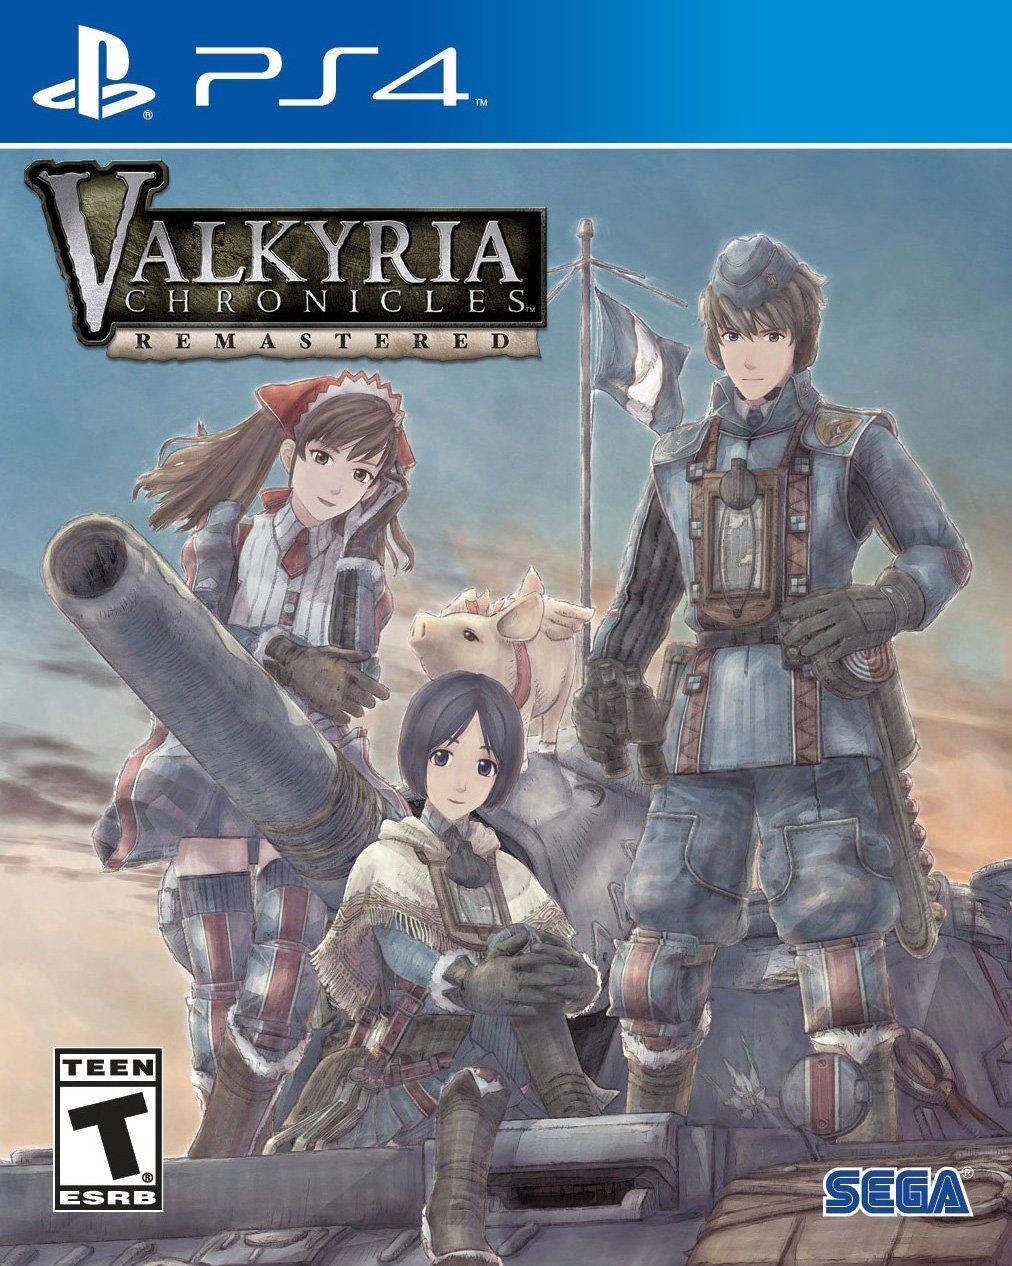 Valkyria Chronicles Ps4 Poster